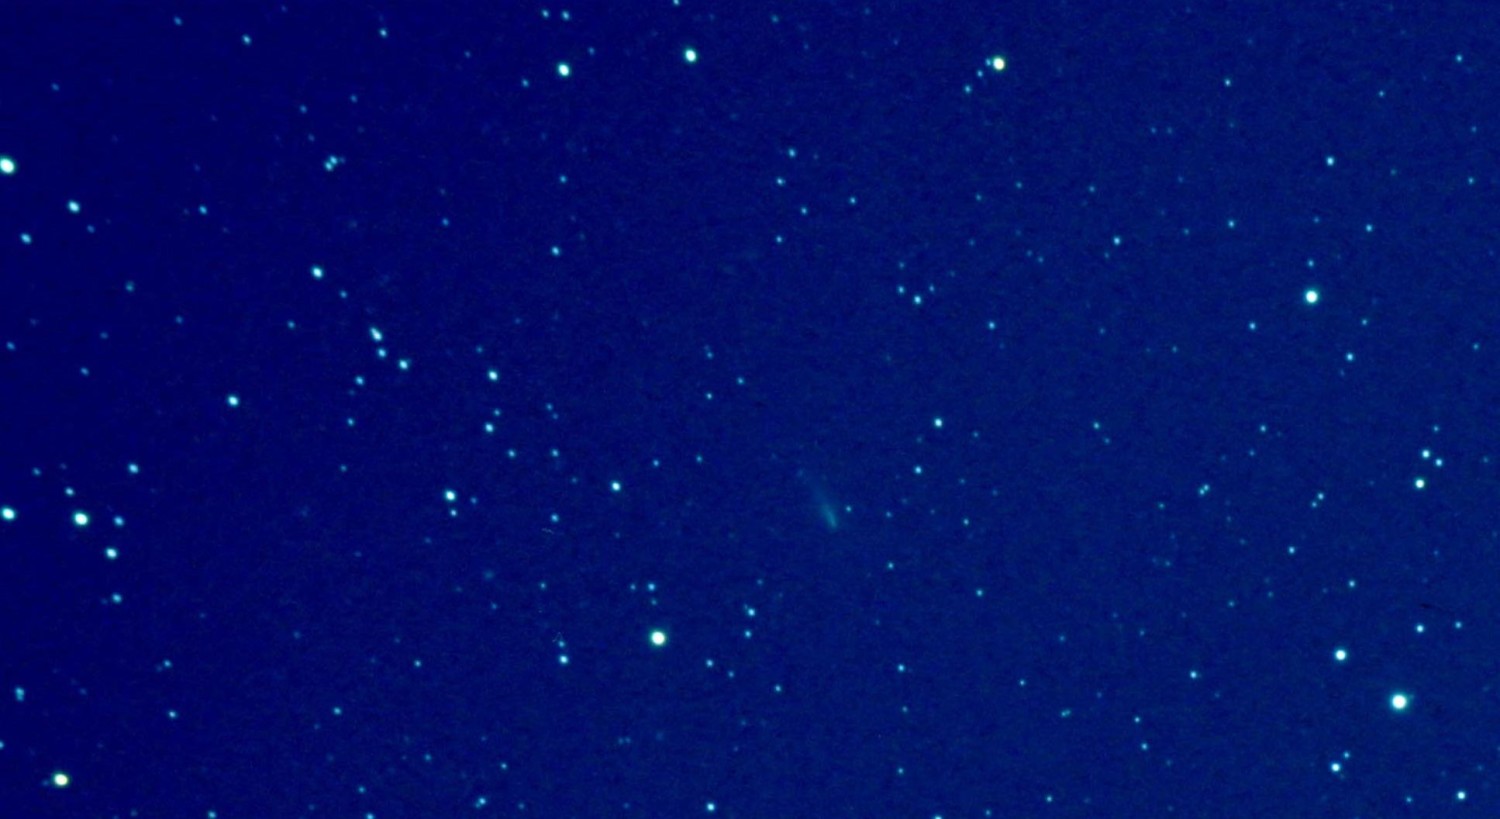 View larger. | Van Macatee captured about 100 frames at Comet ISON's location on the sky's dome, on September 14, 2013. Of those, he said, 10 showed the comet reasonably well. He then stacked the 10 good frames to compose this image.